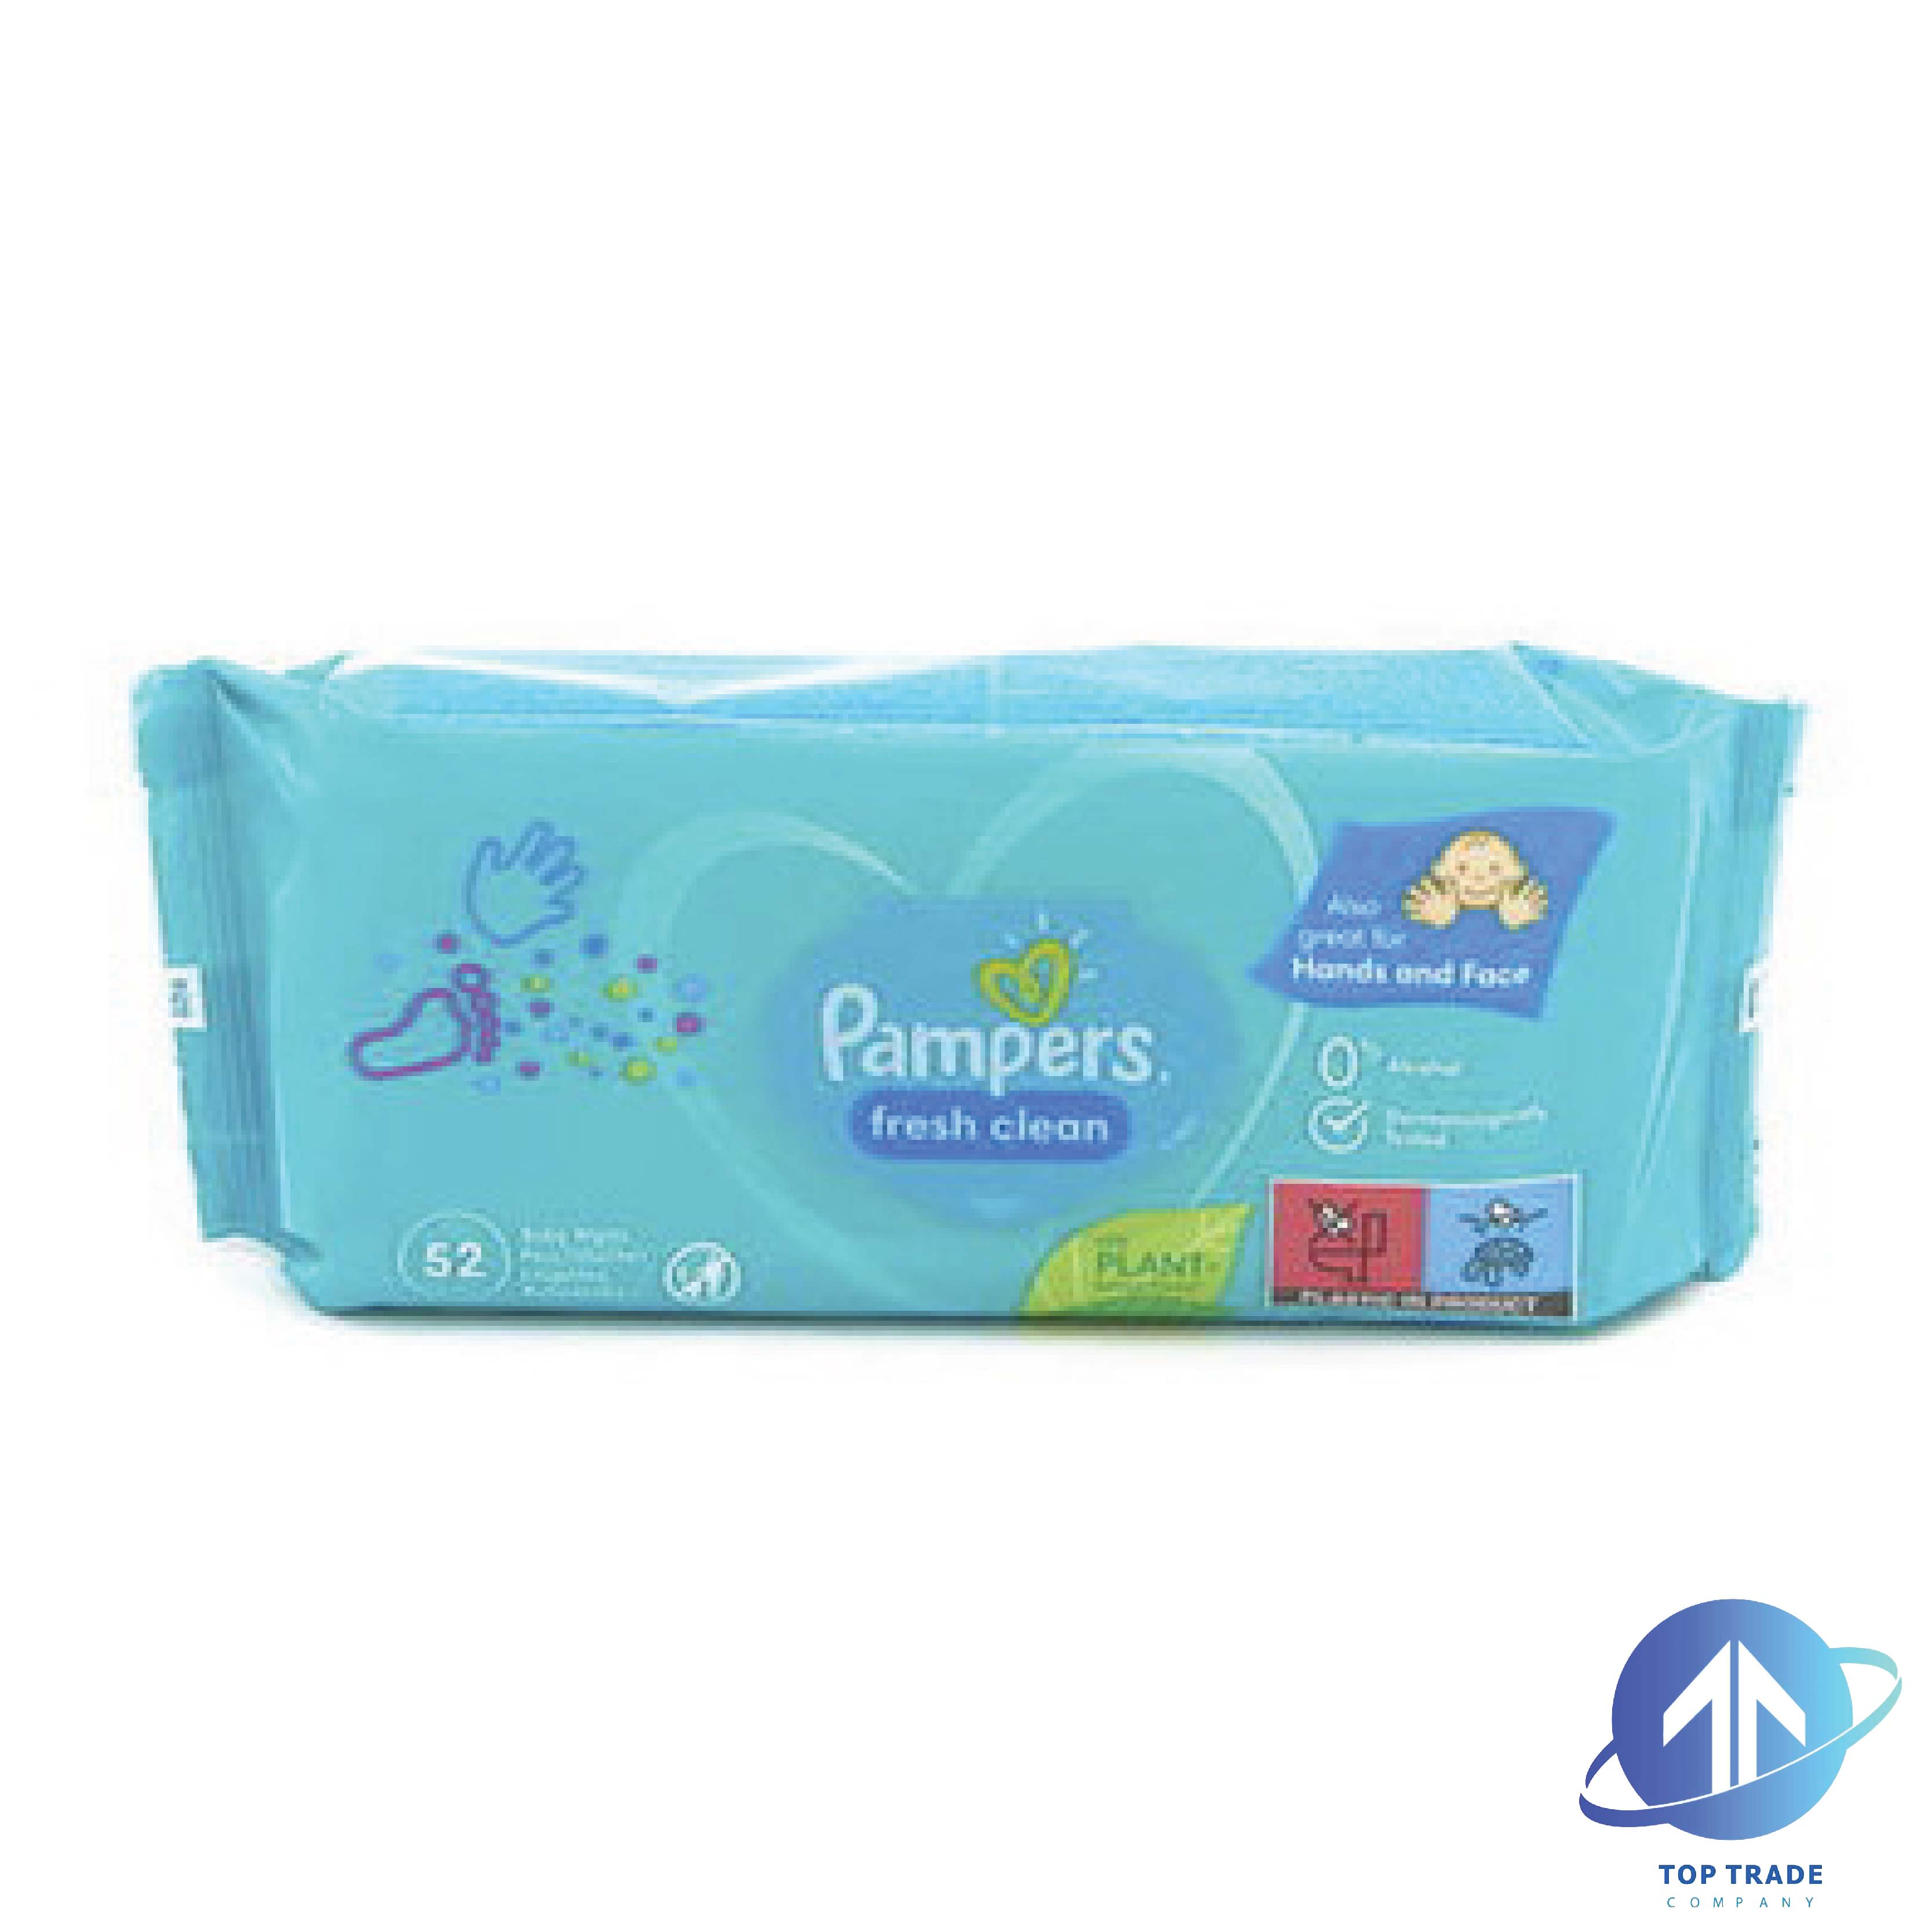 Pampers baby wipes 52pc Fresh Clean